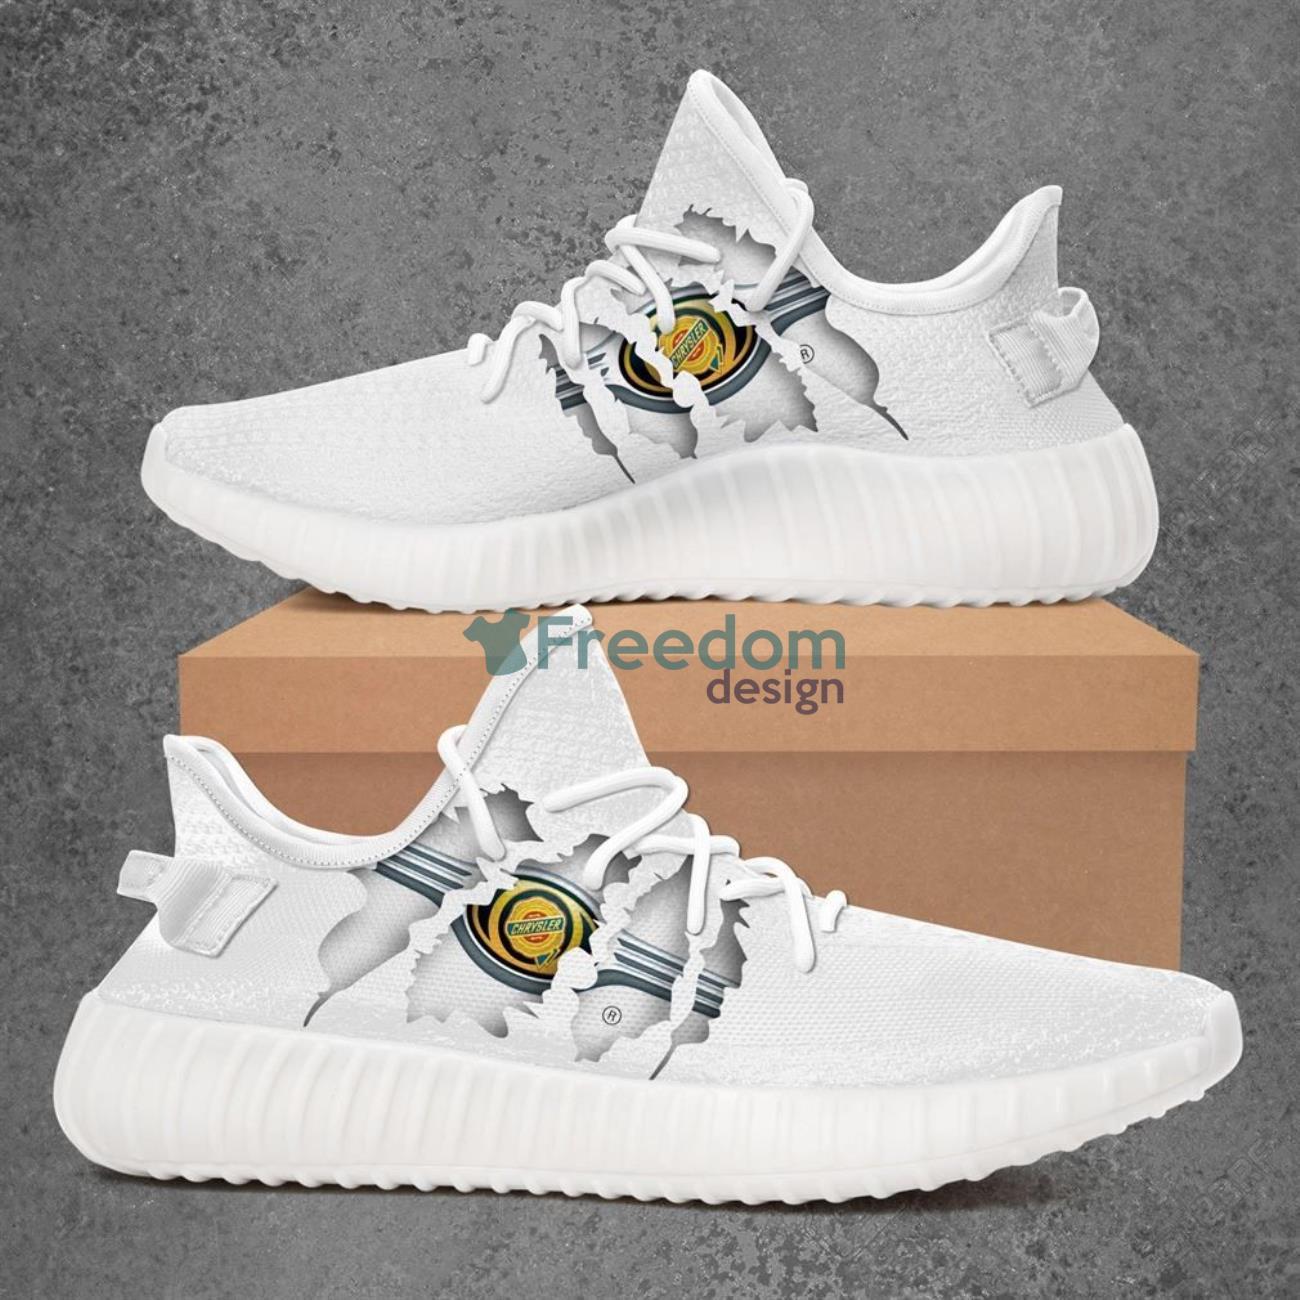 Chrysler Car Yeezy White Shoes Sport Sneakers